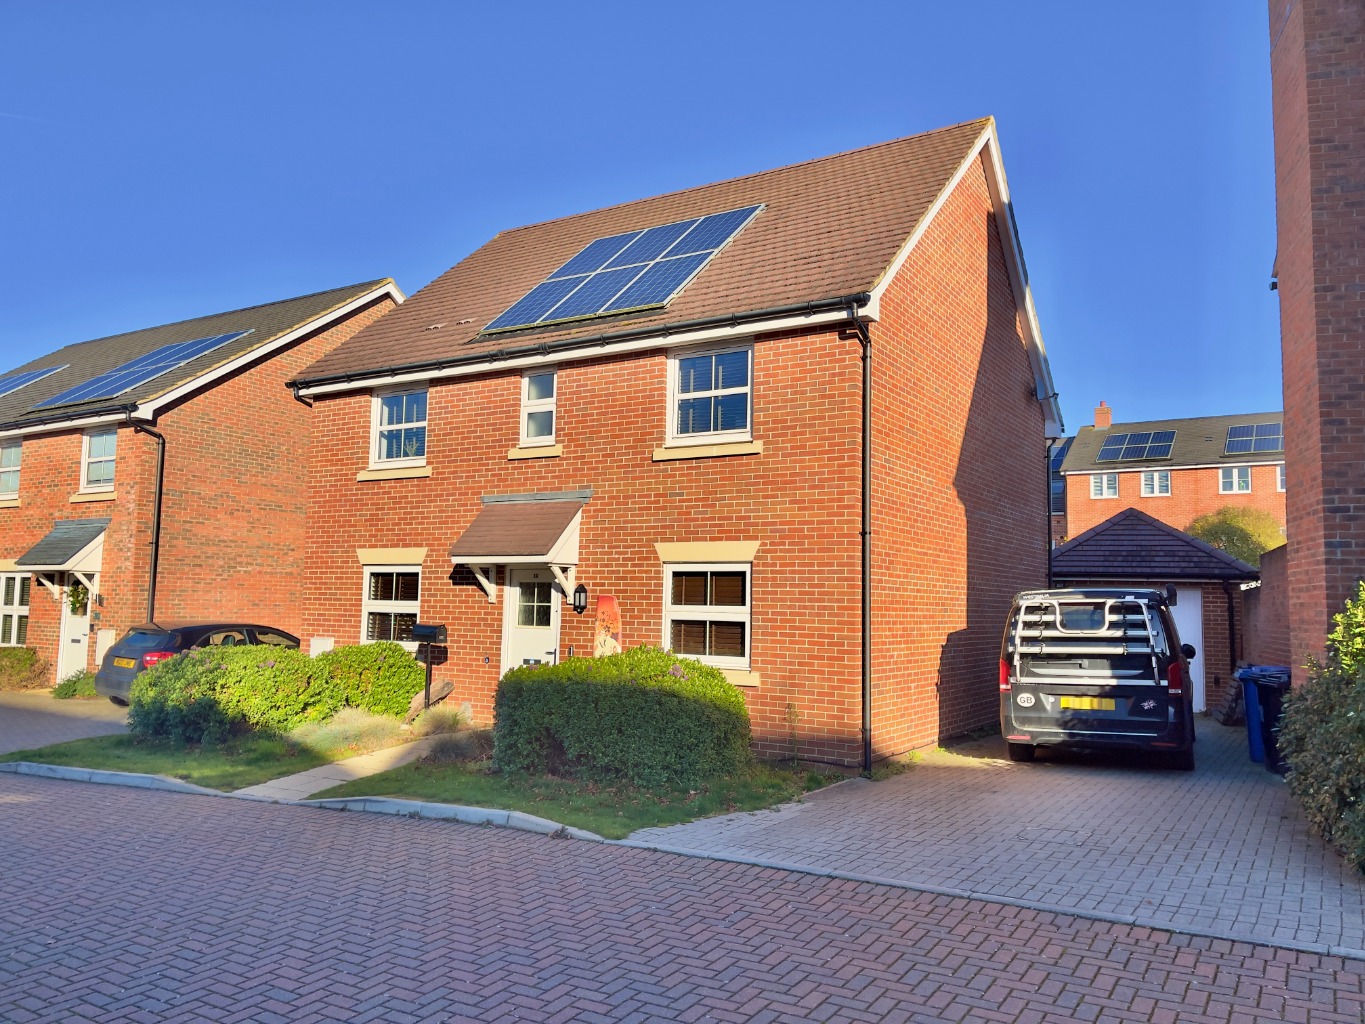 4 bed detached house for sale in Thapa Close, Fleet - Property Image 1